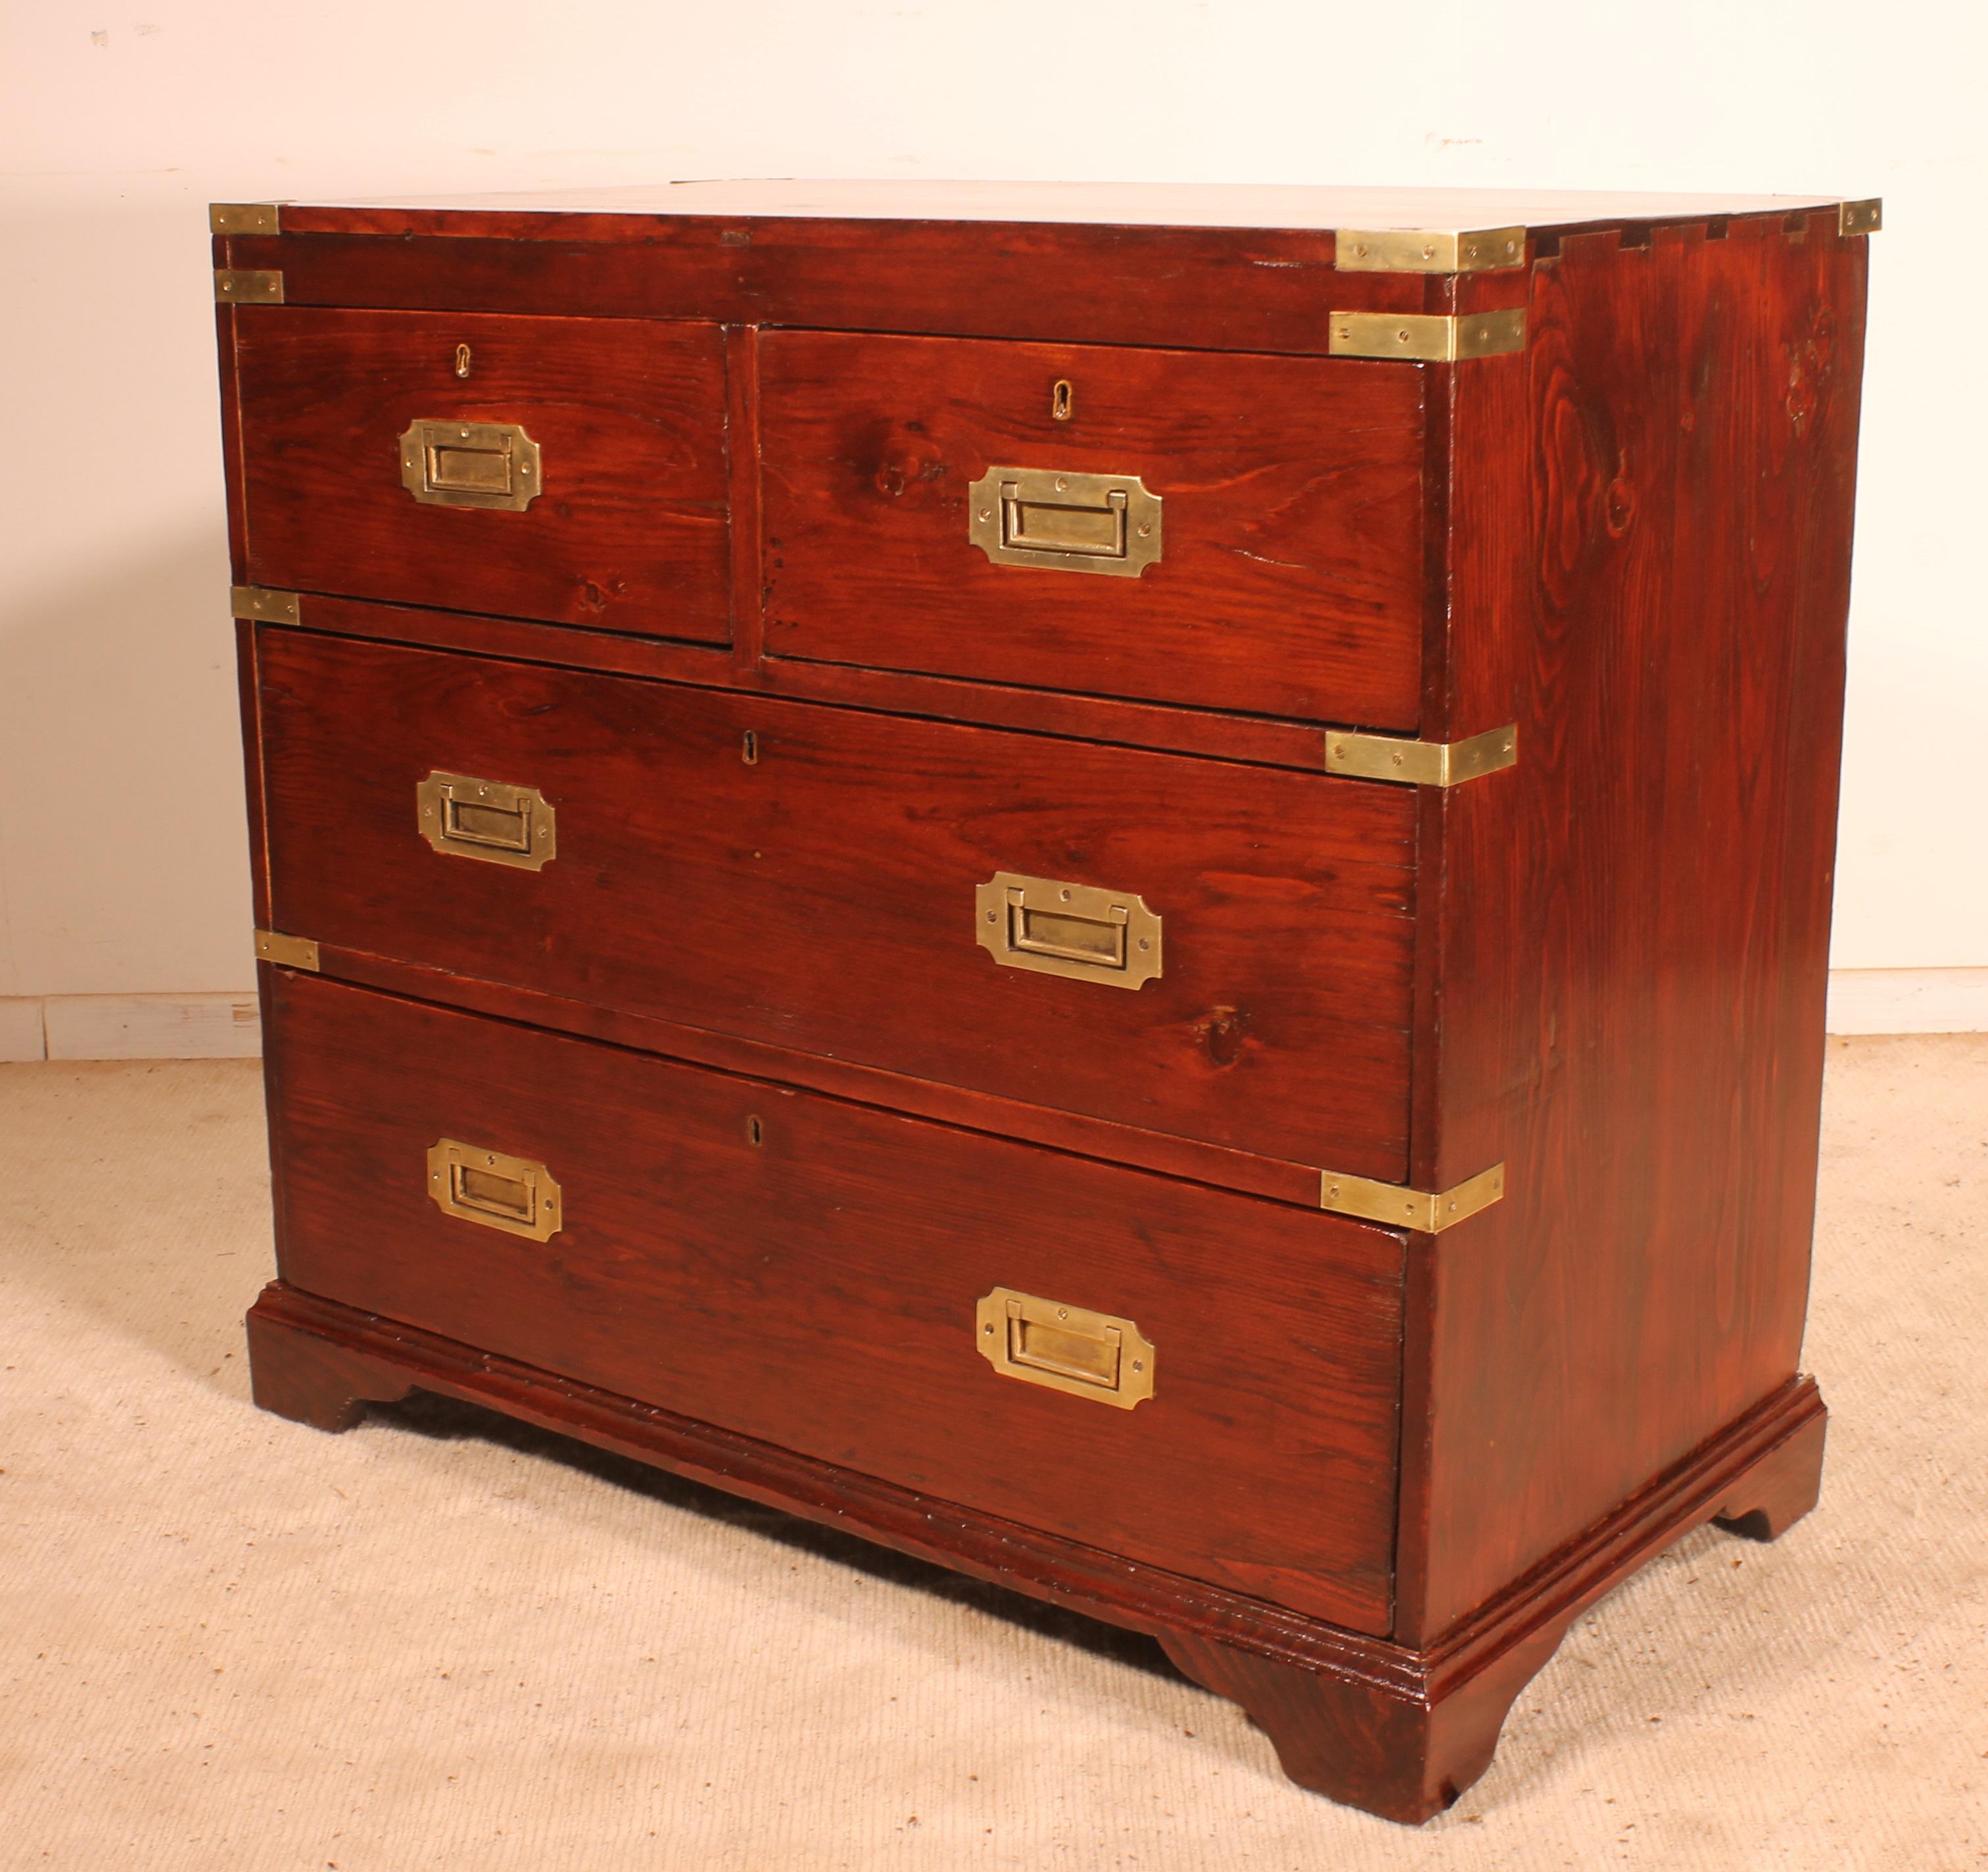 English Small Campaign Chest of Drawers from 19th Century Stamped Heals & Sons London